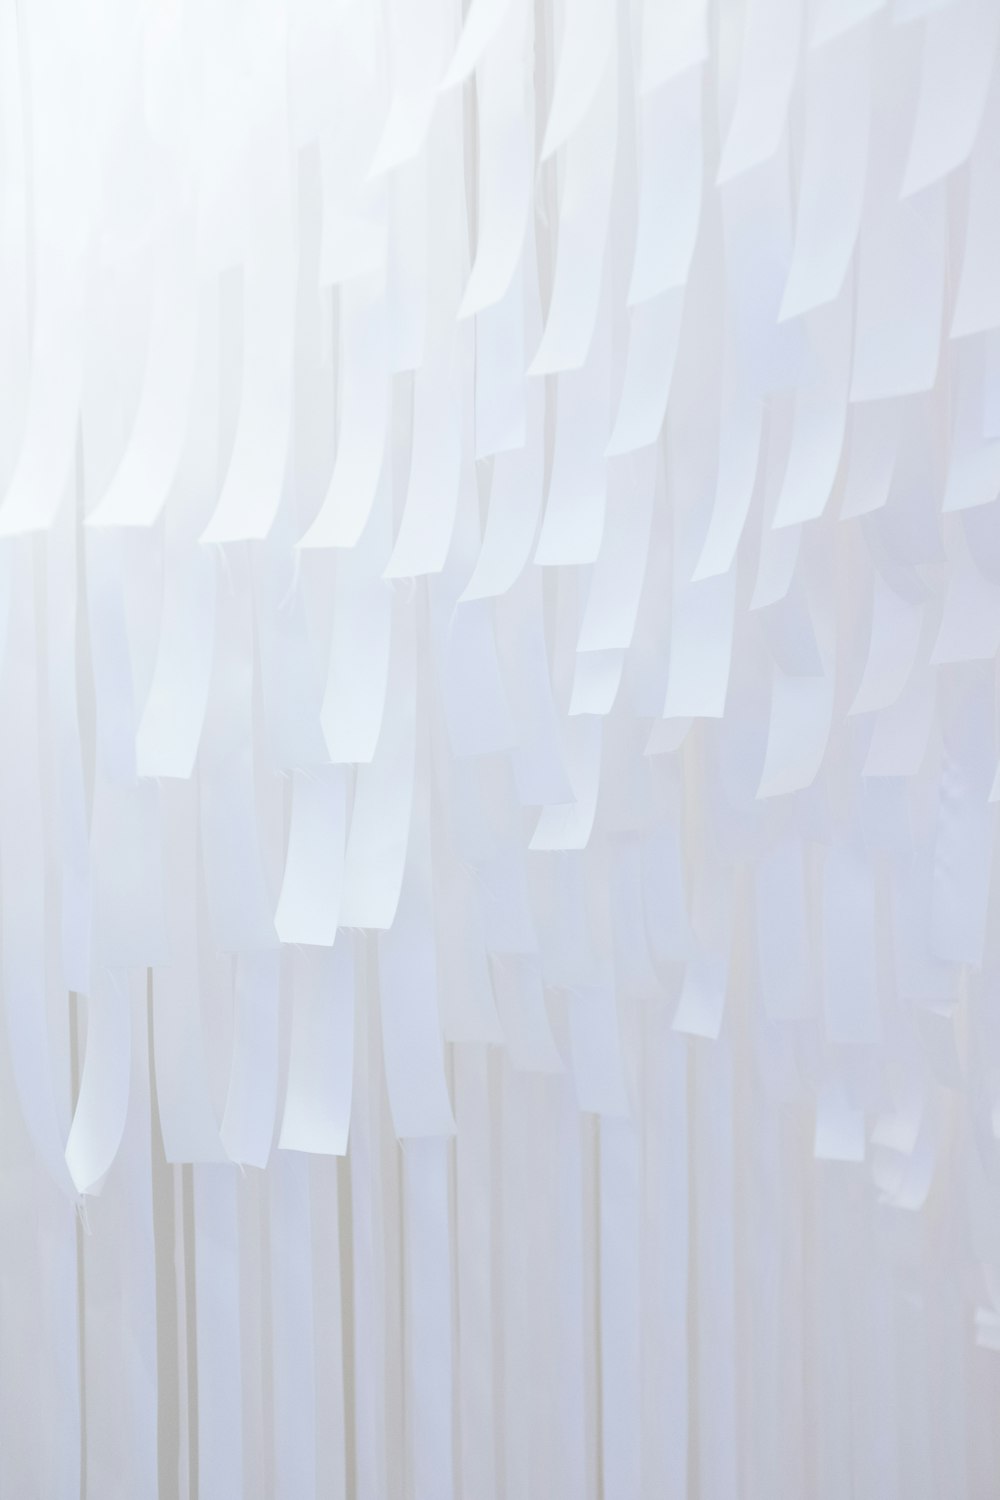 a white wall that has a bunch of strips of paper on it